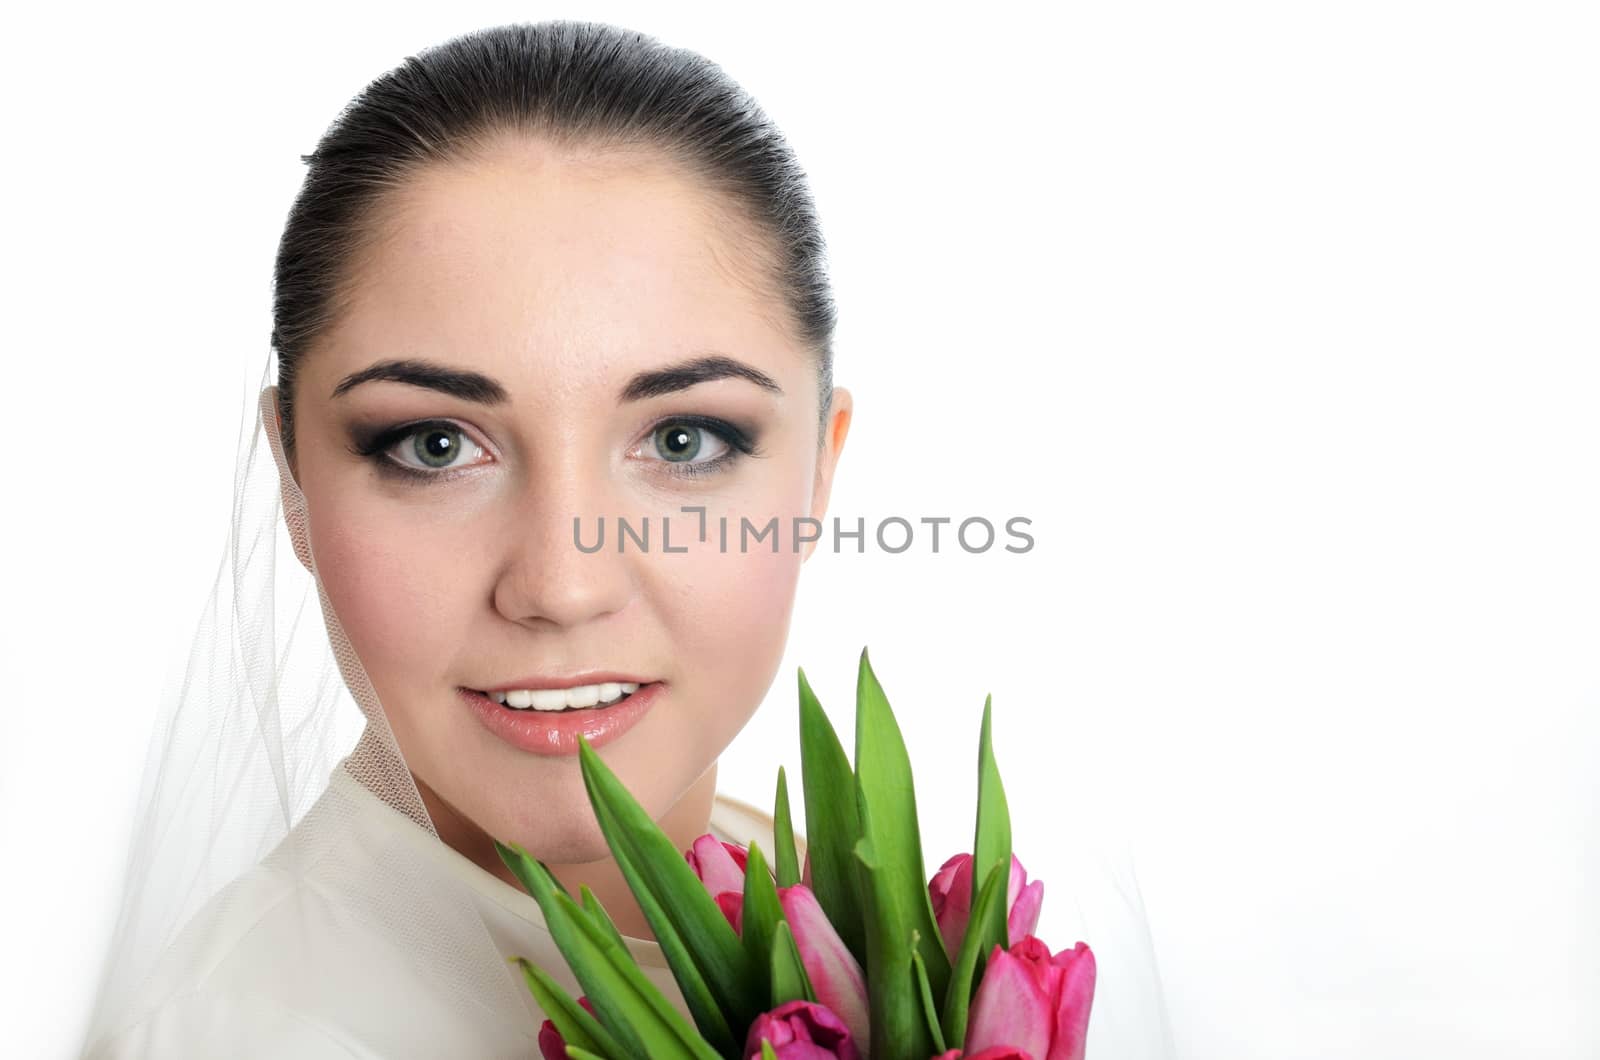 Happy bride with white veil and tulips bouquet in her hand. Young, happy female model.